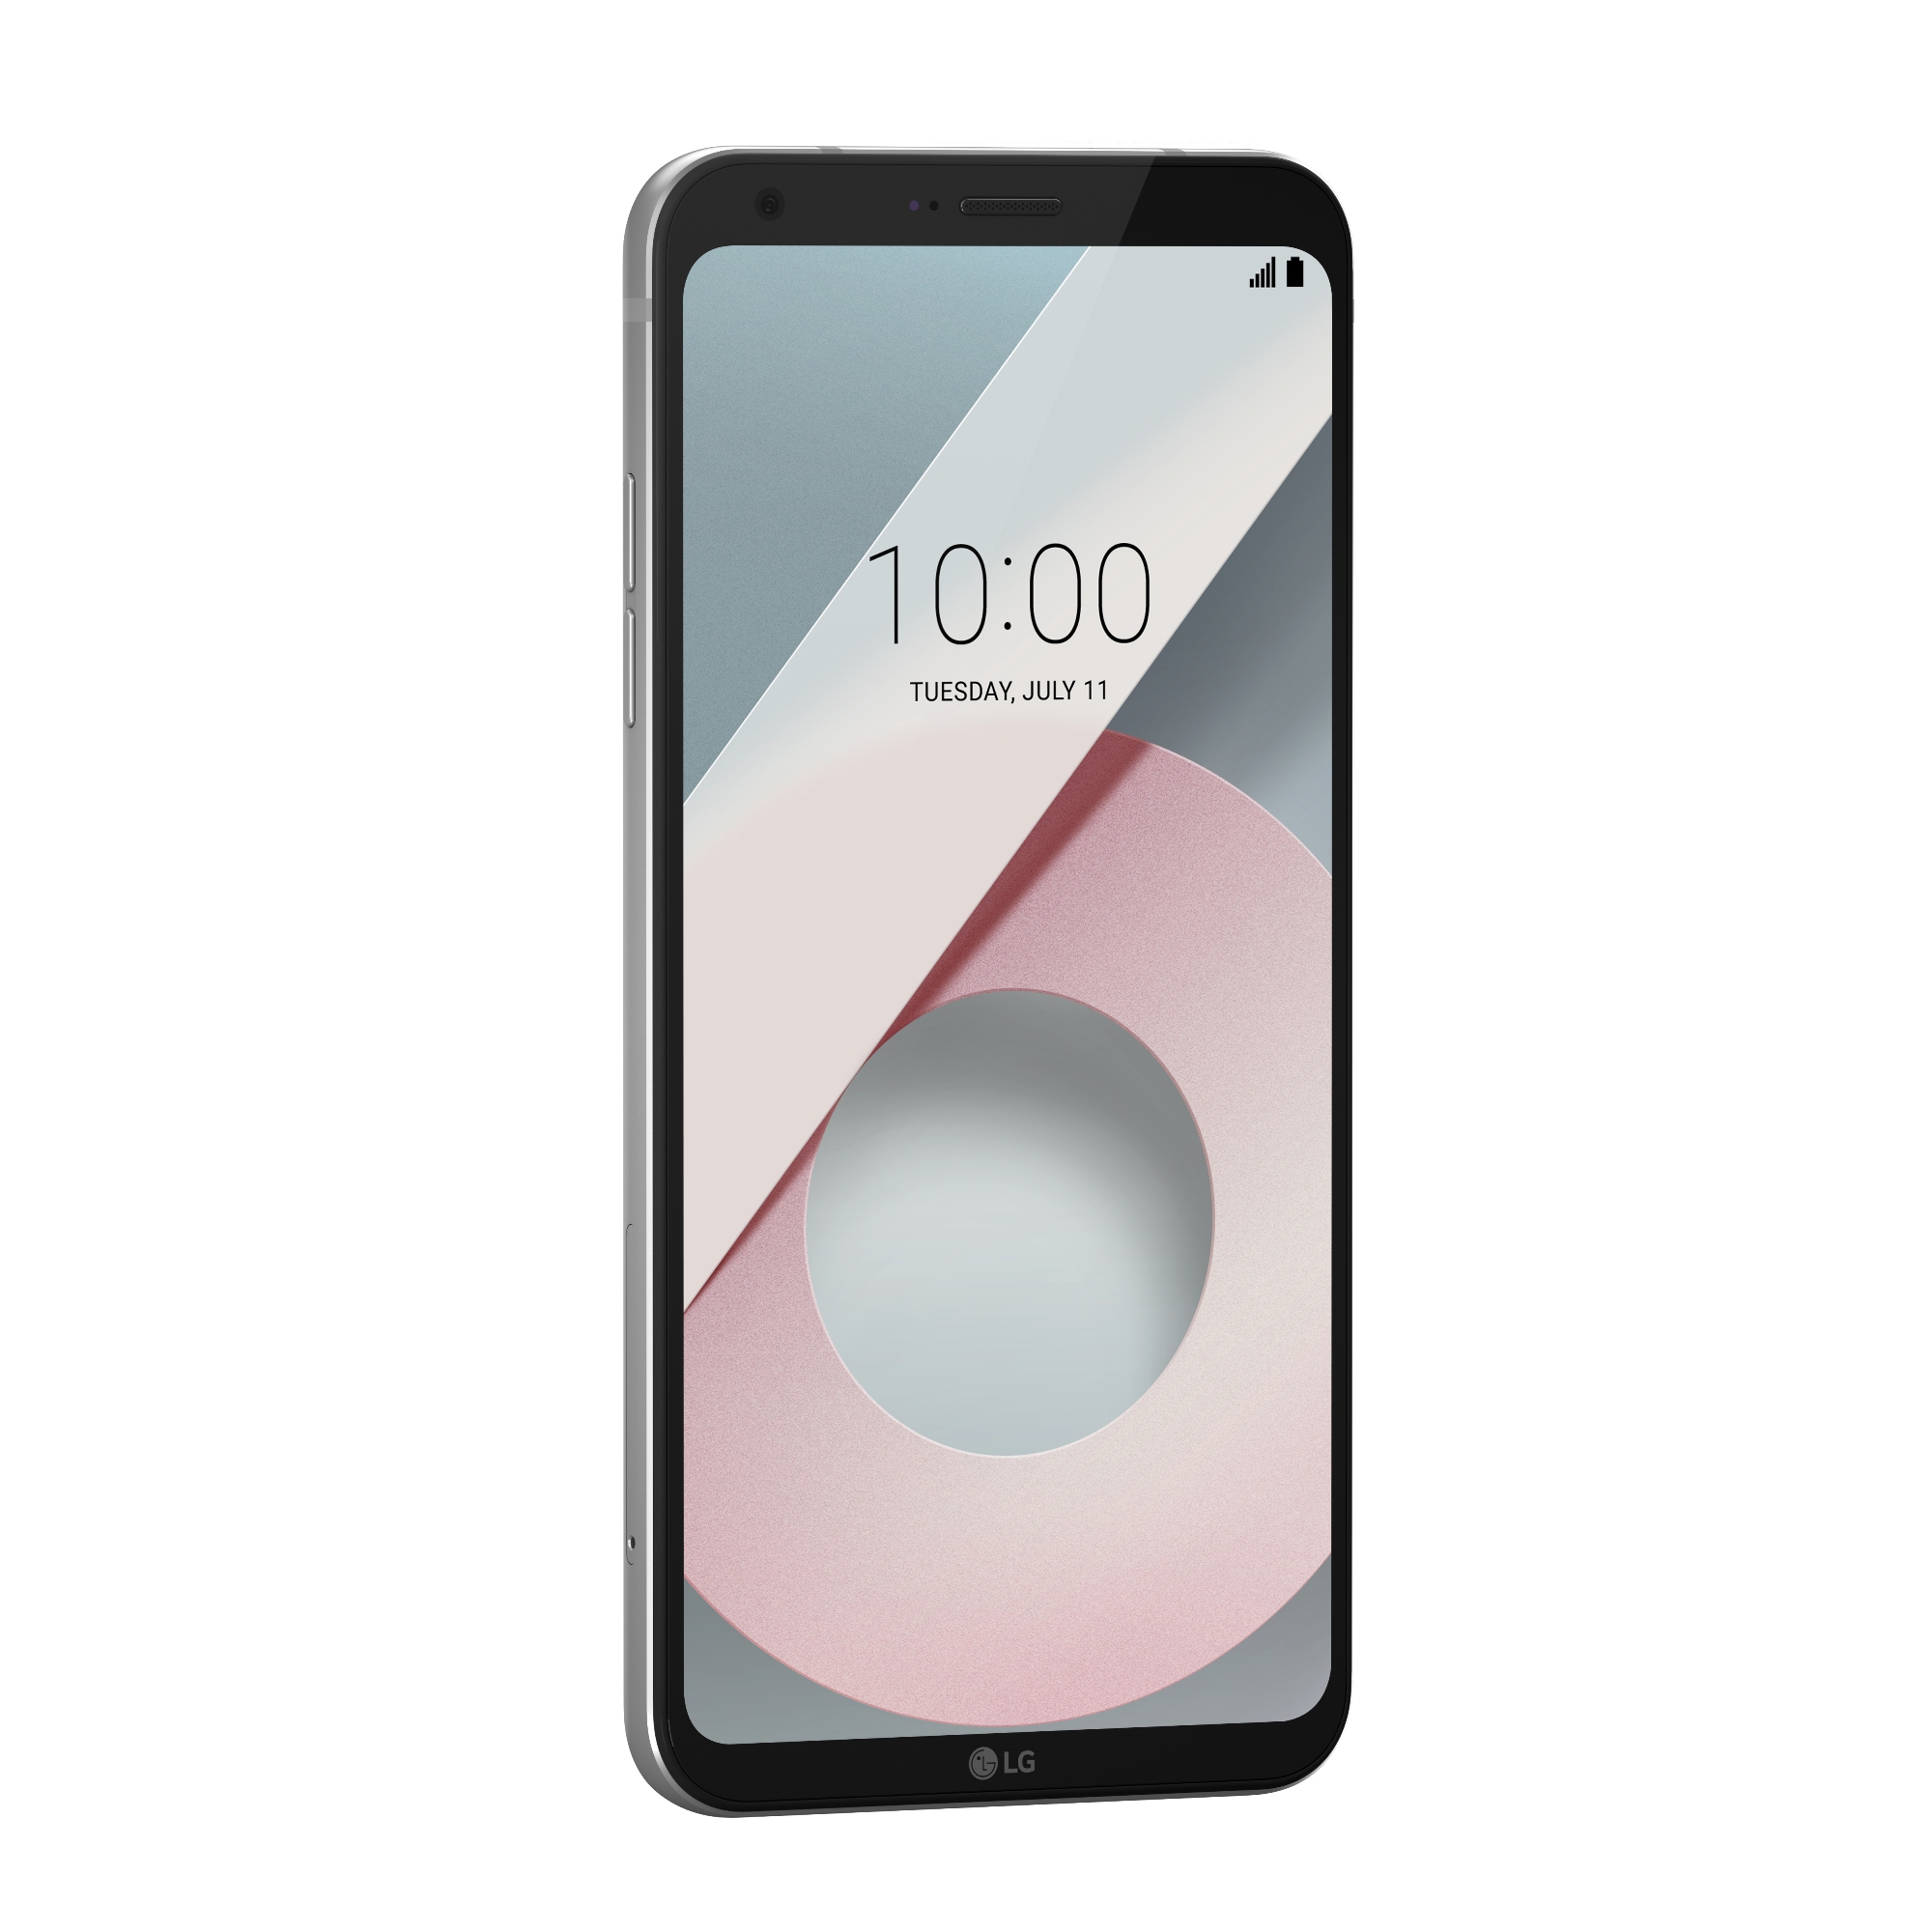 LG Q6 Now Available in PH: 5.5-inch FullVision Display and Snapdragon 435